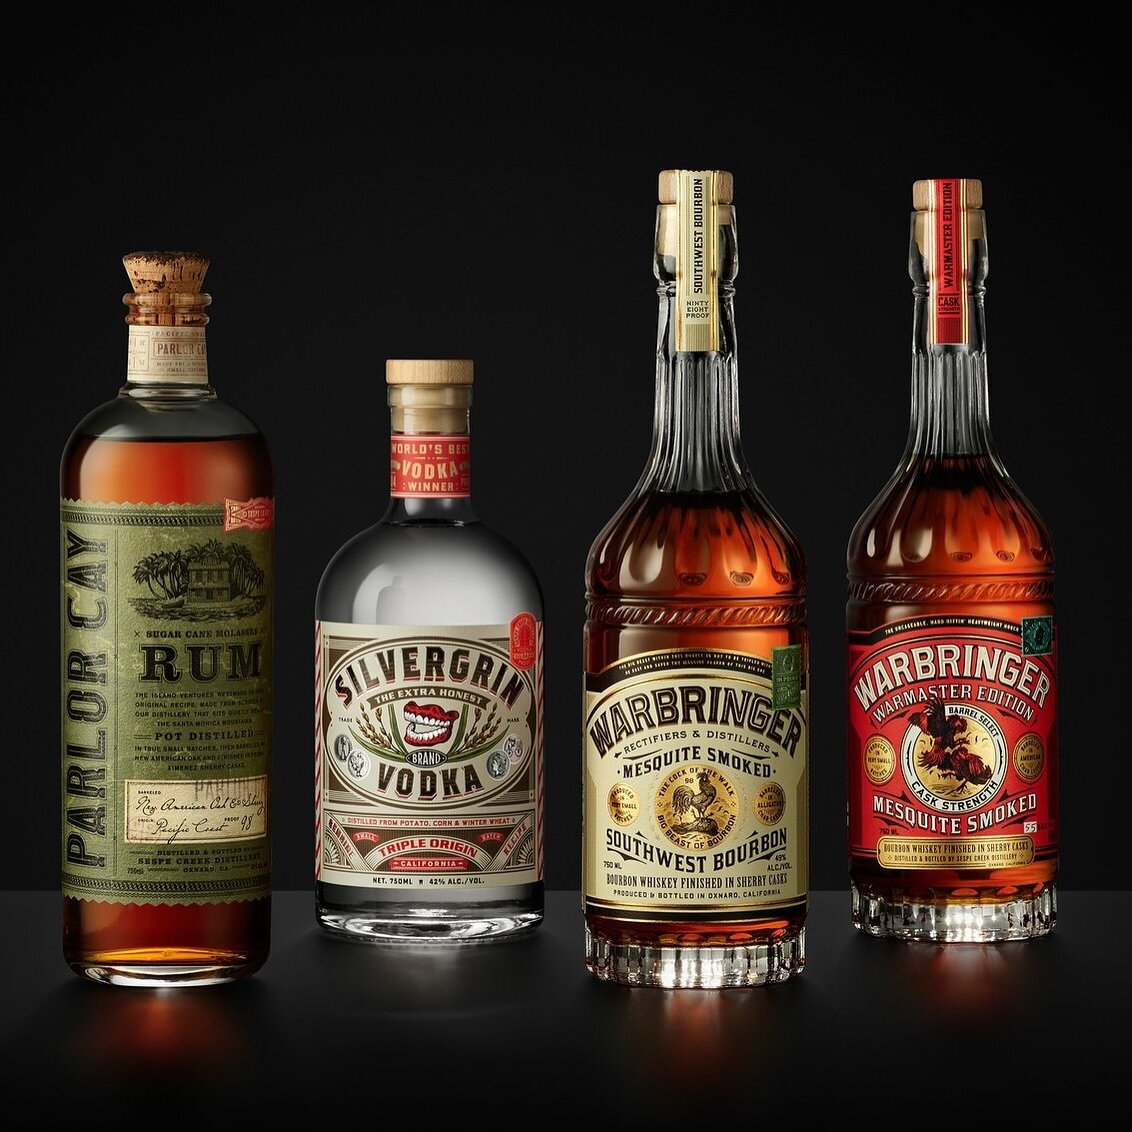 At Sespe Creek Distillery, we pay homage to Americana heritage. Each brand is a passageway to places and moments in time that we revere. The liquor inside each bottle showcases our obsession with The Craft, and our belief that going the extra mile re